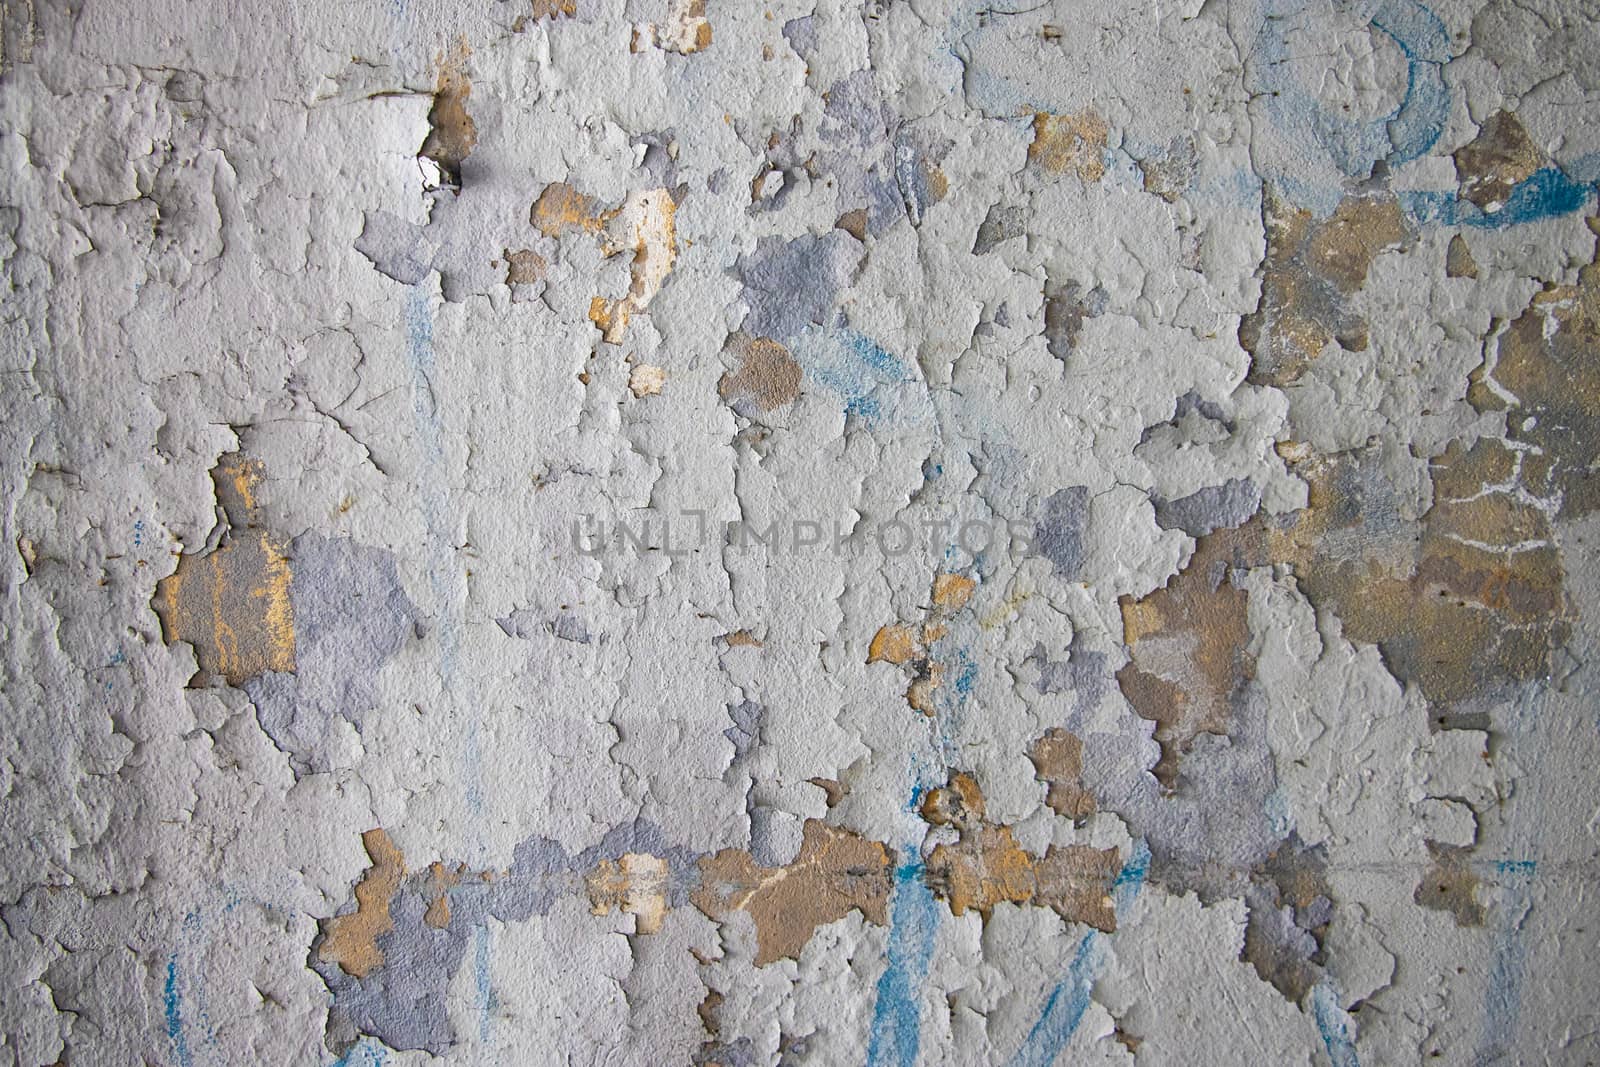 Decrepit White Dirty Plaster Wall With Cracked Structure Horizontal Empty Grunge Background. Old Gray Grey Mortar Wall With Rough Shabby Stucco Layer Isolated Texture. Blank Peeled Messy Surface. by kip02kas